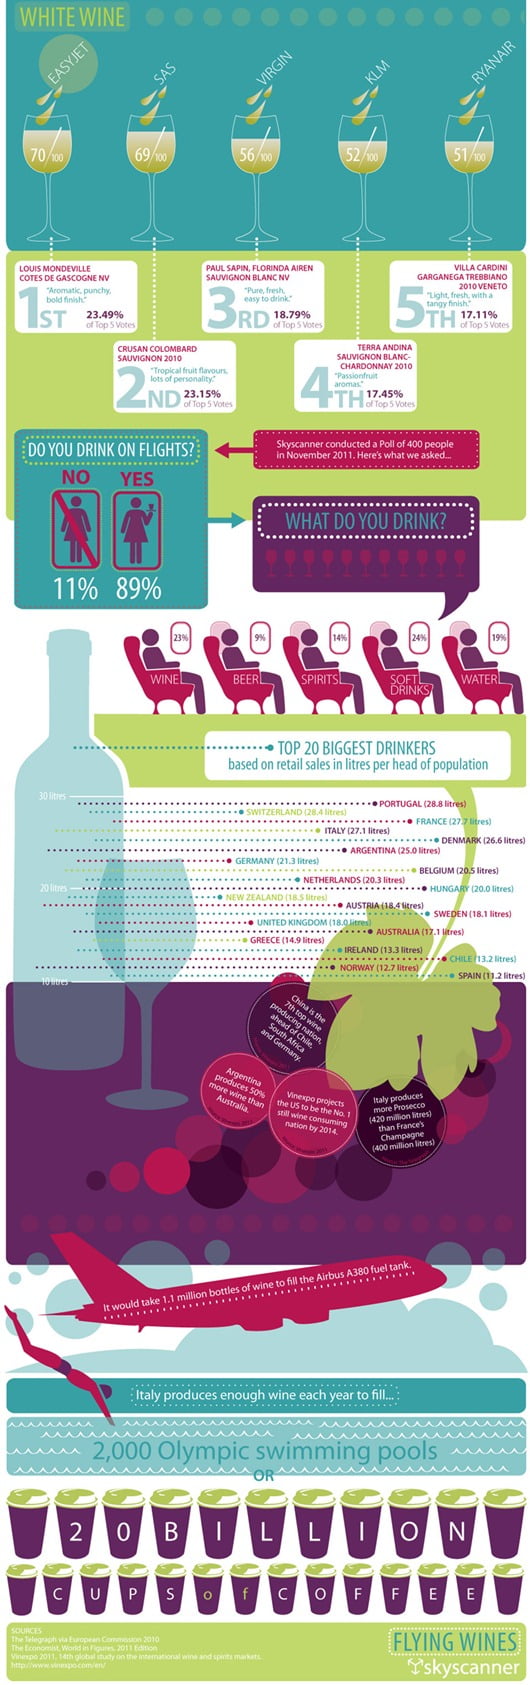 Flying with Wines-An Infographic (2)